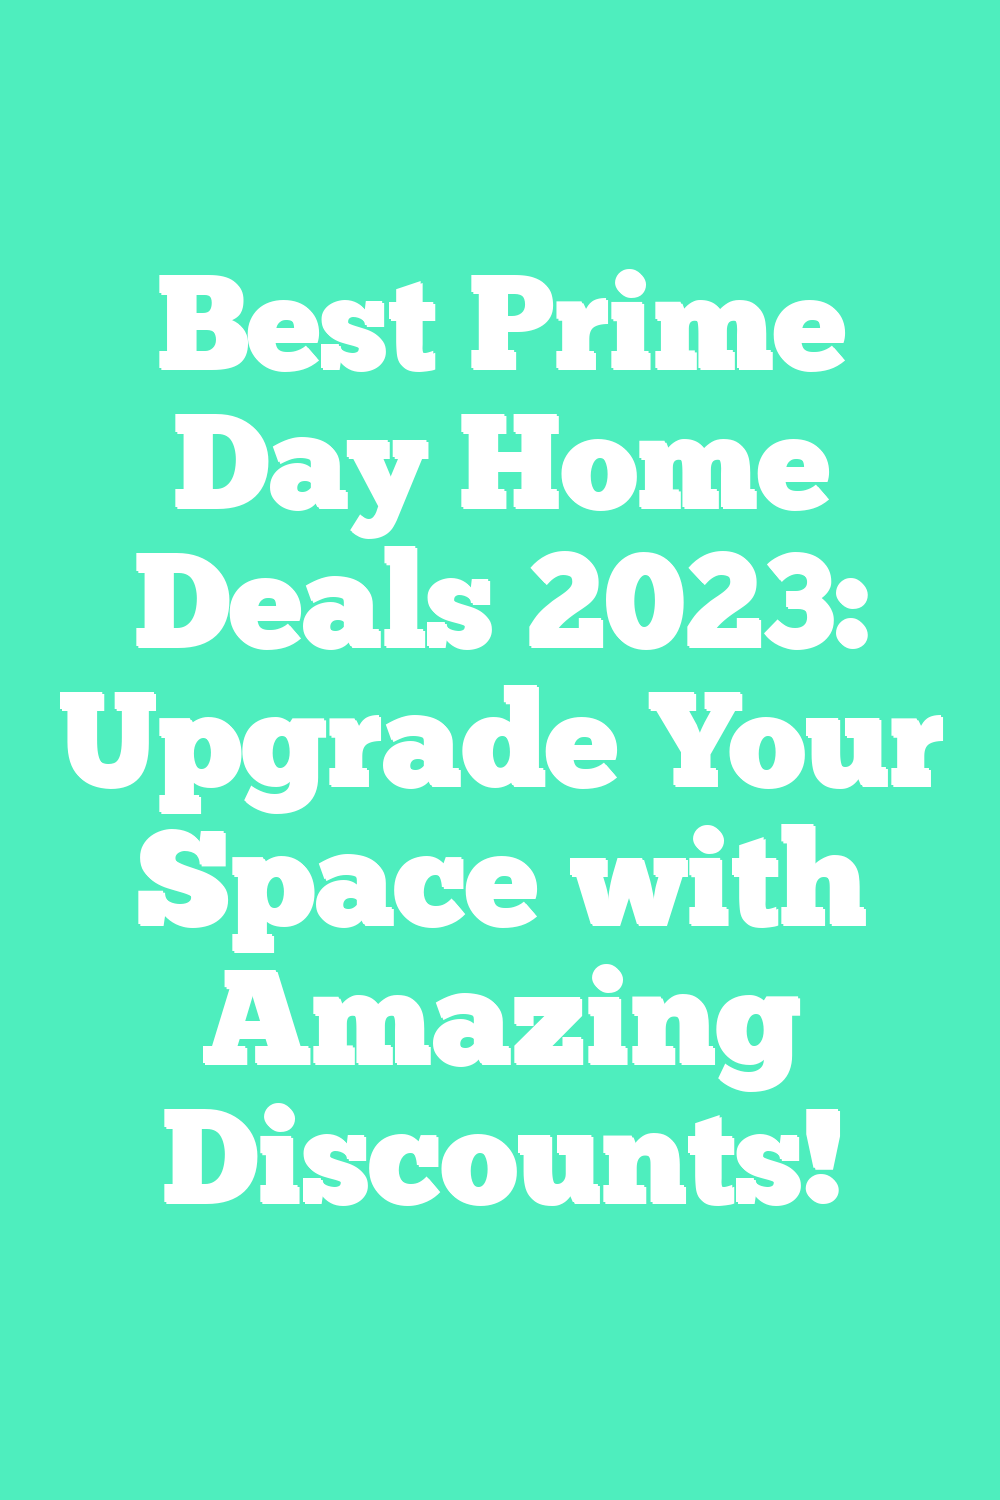 Best Prime Day Home Deals 2023: Upgrade Your Space with Amazing Discounts!